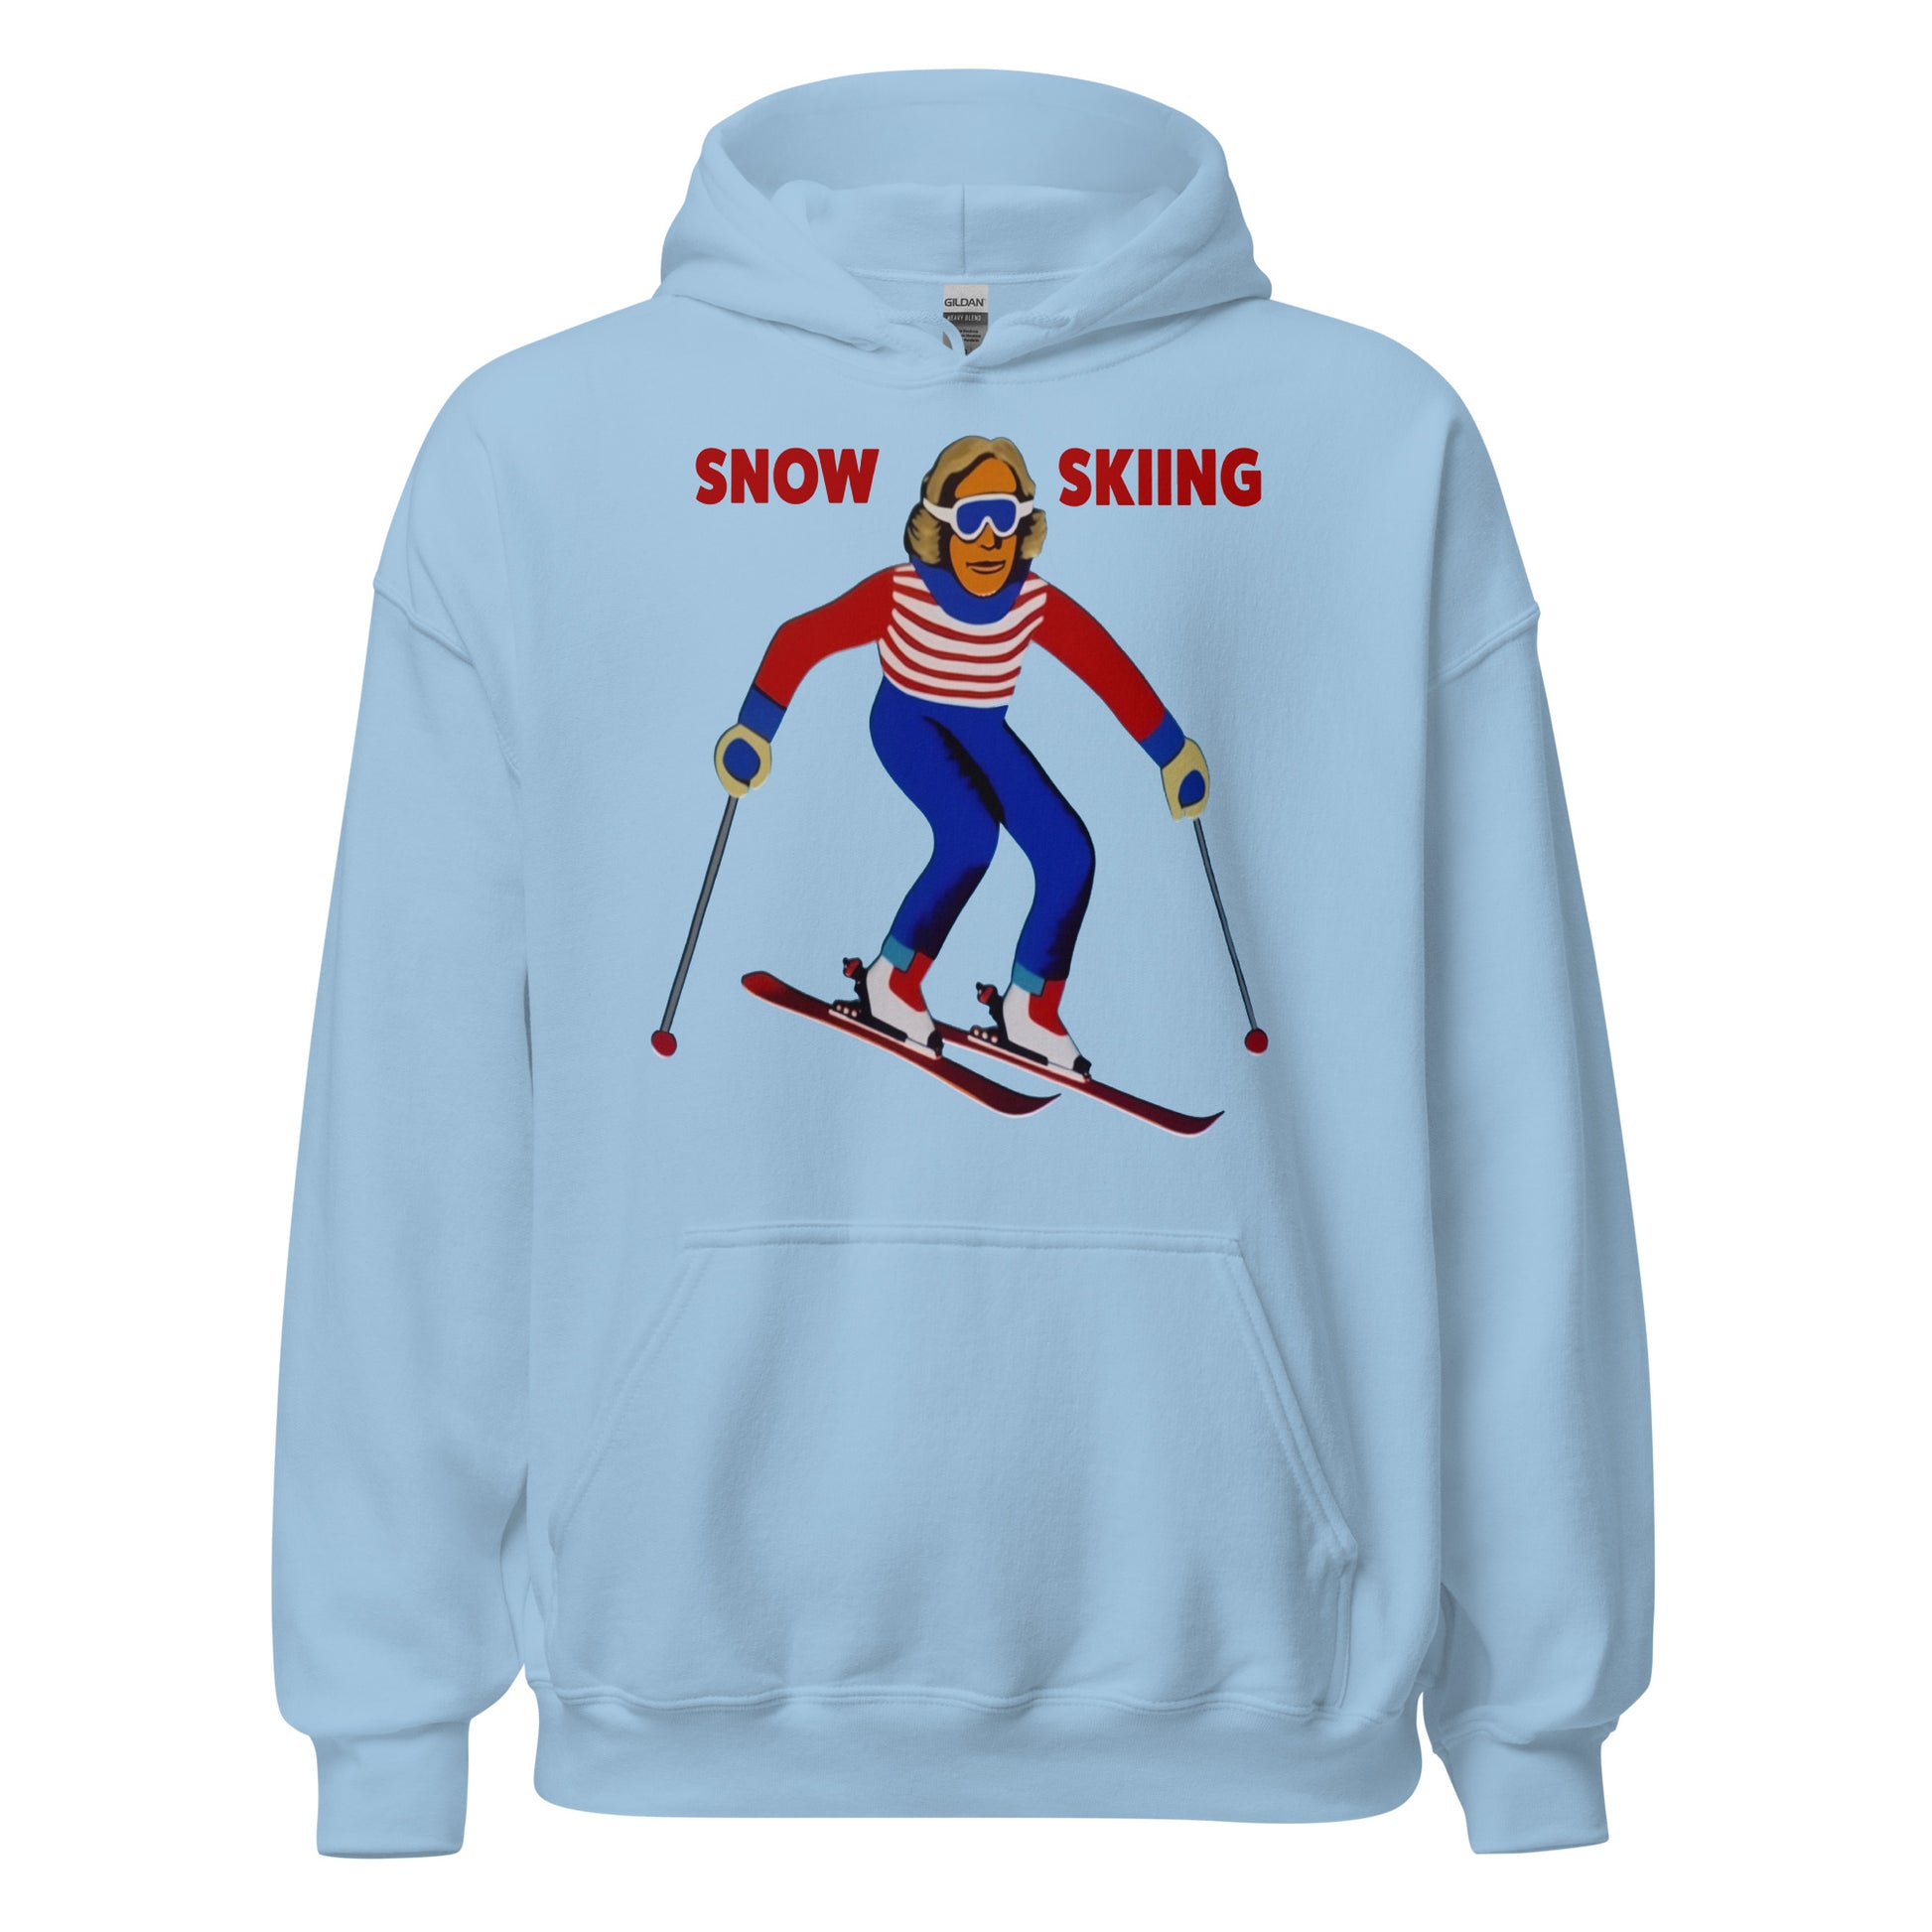 Snow Skiing printed hoodie by Whistler Shirts